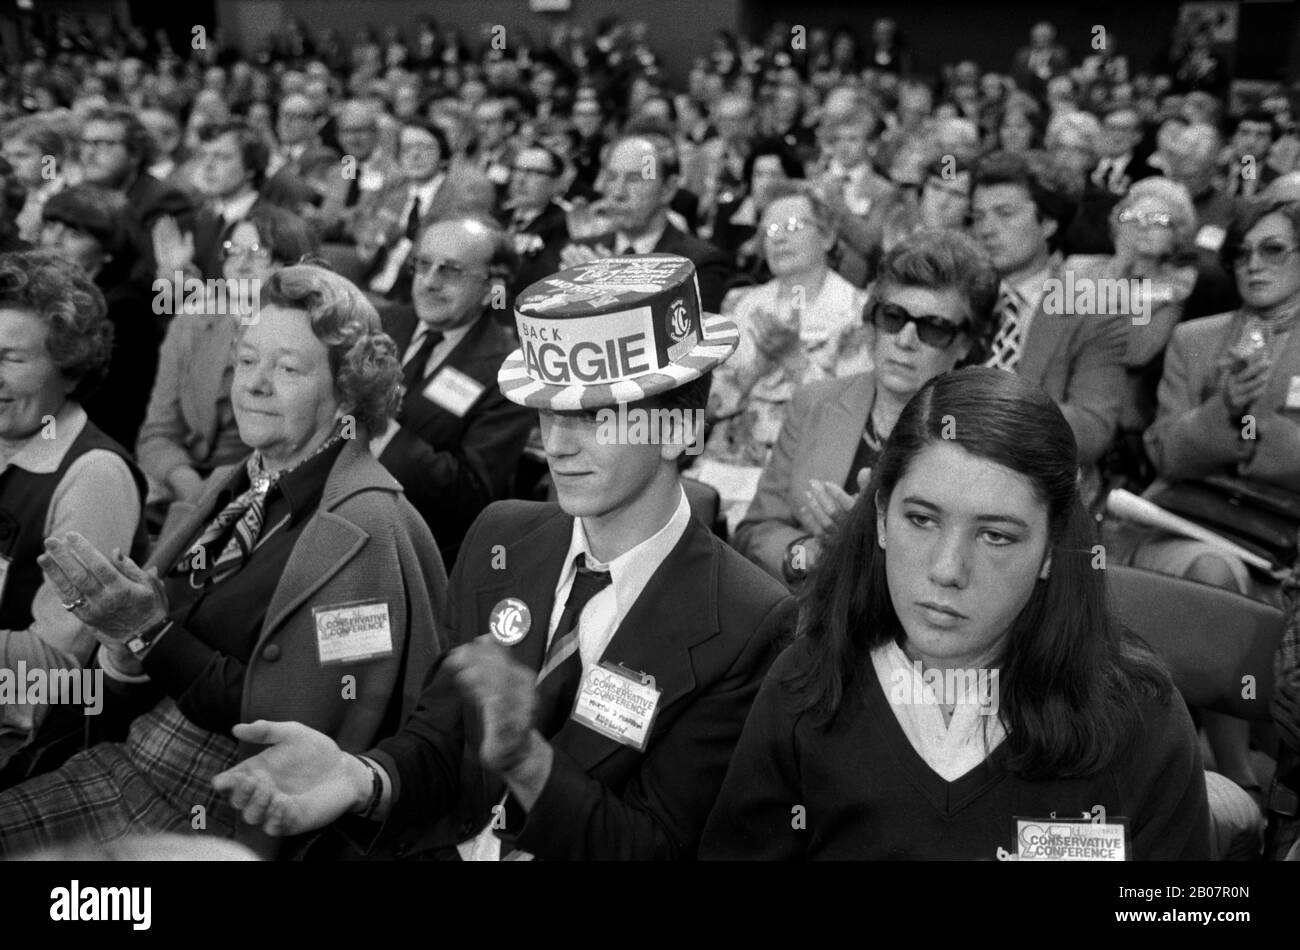 UK Young Conservatives 1980s. Young adult man applauds Maggie Mrs Margaret Thatcher at the Brighton Conservative Party Conference 1981. He is wearing a 'Back Maggie', party conference hat. Strike back with the Tories was the party slogan. England  HOMER SYKES Stock Photo